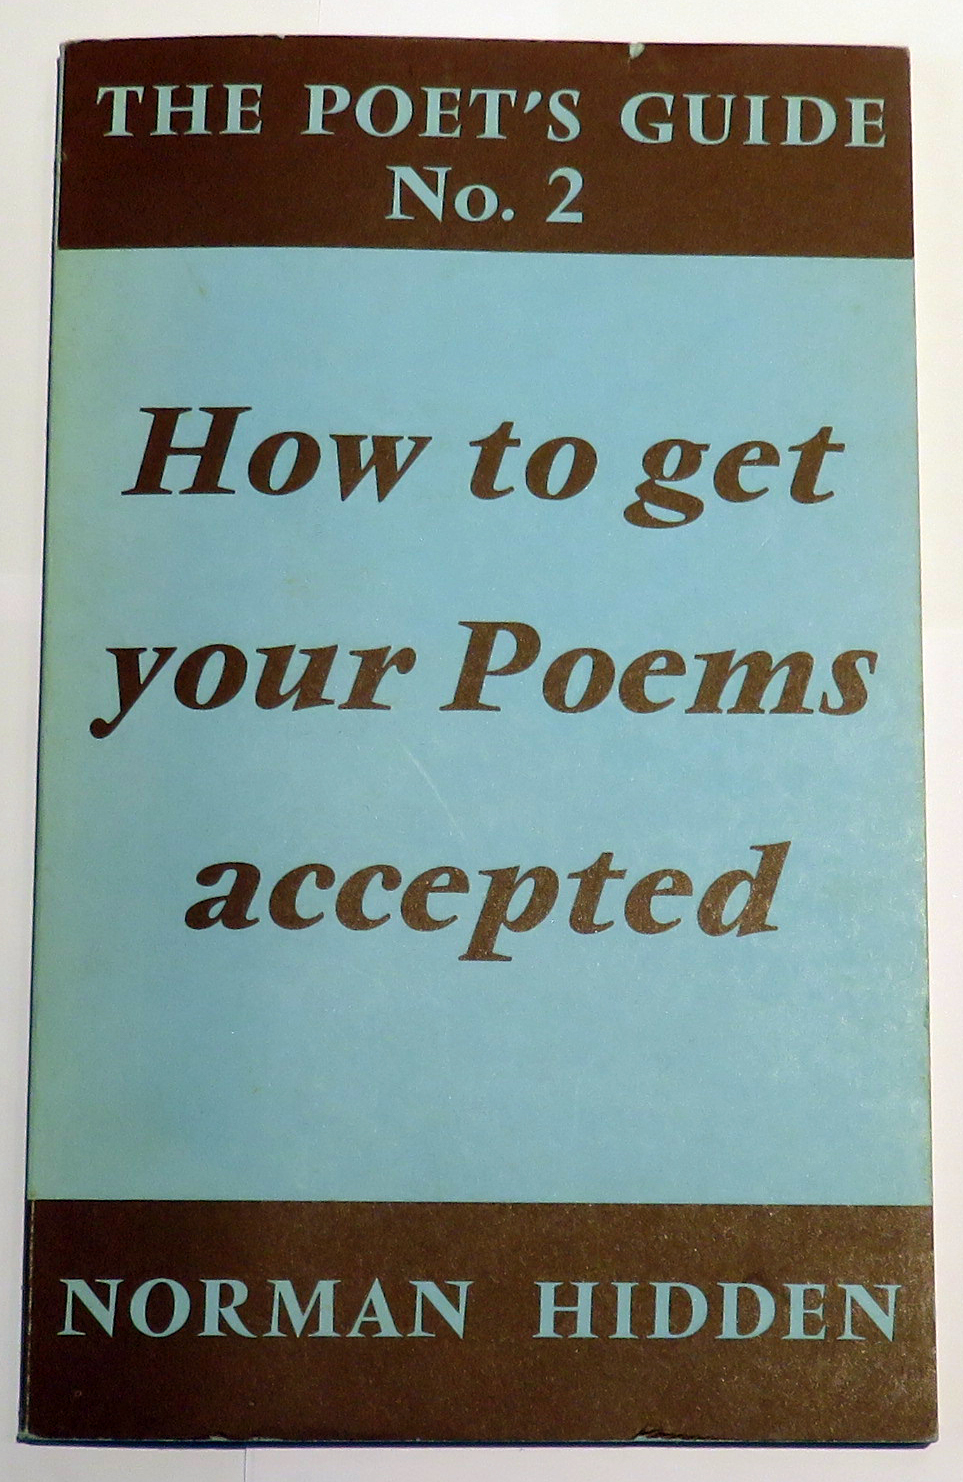 How To Get Your Poems Accepted The Poets Guide No. 2